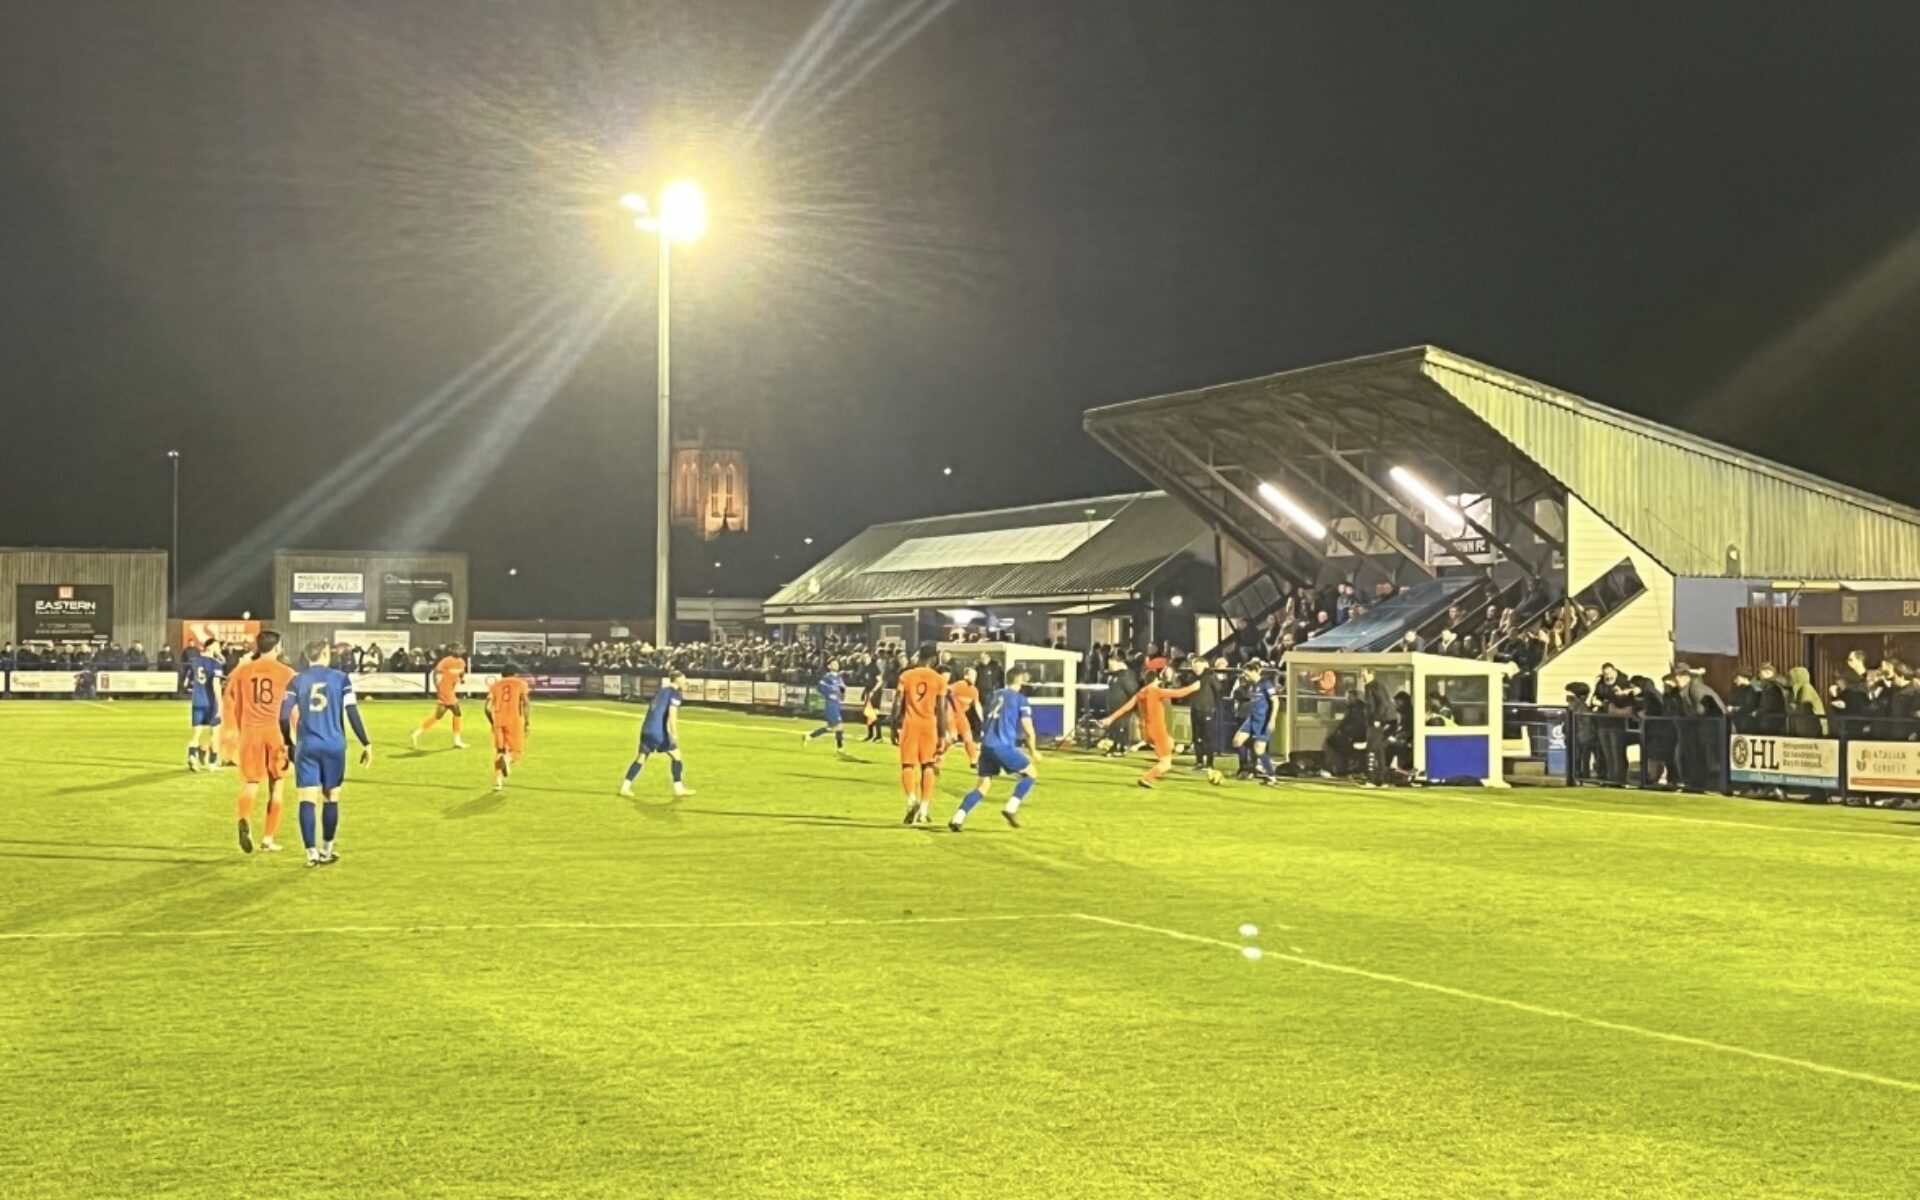 Bury Town v Brentwood Town - Match Report Featured Image